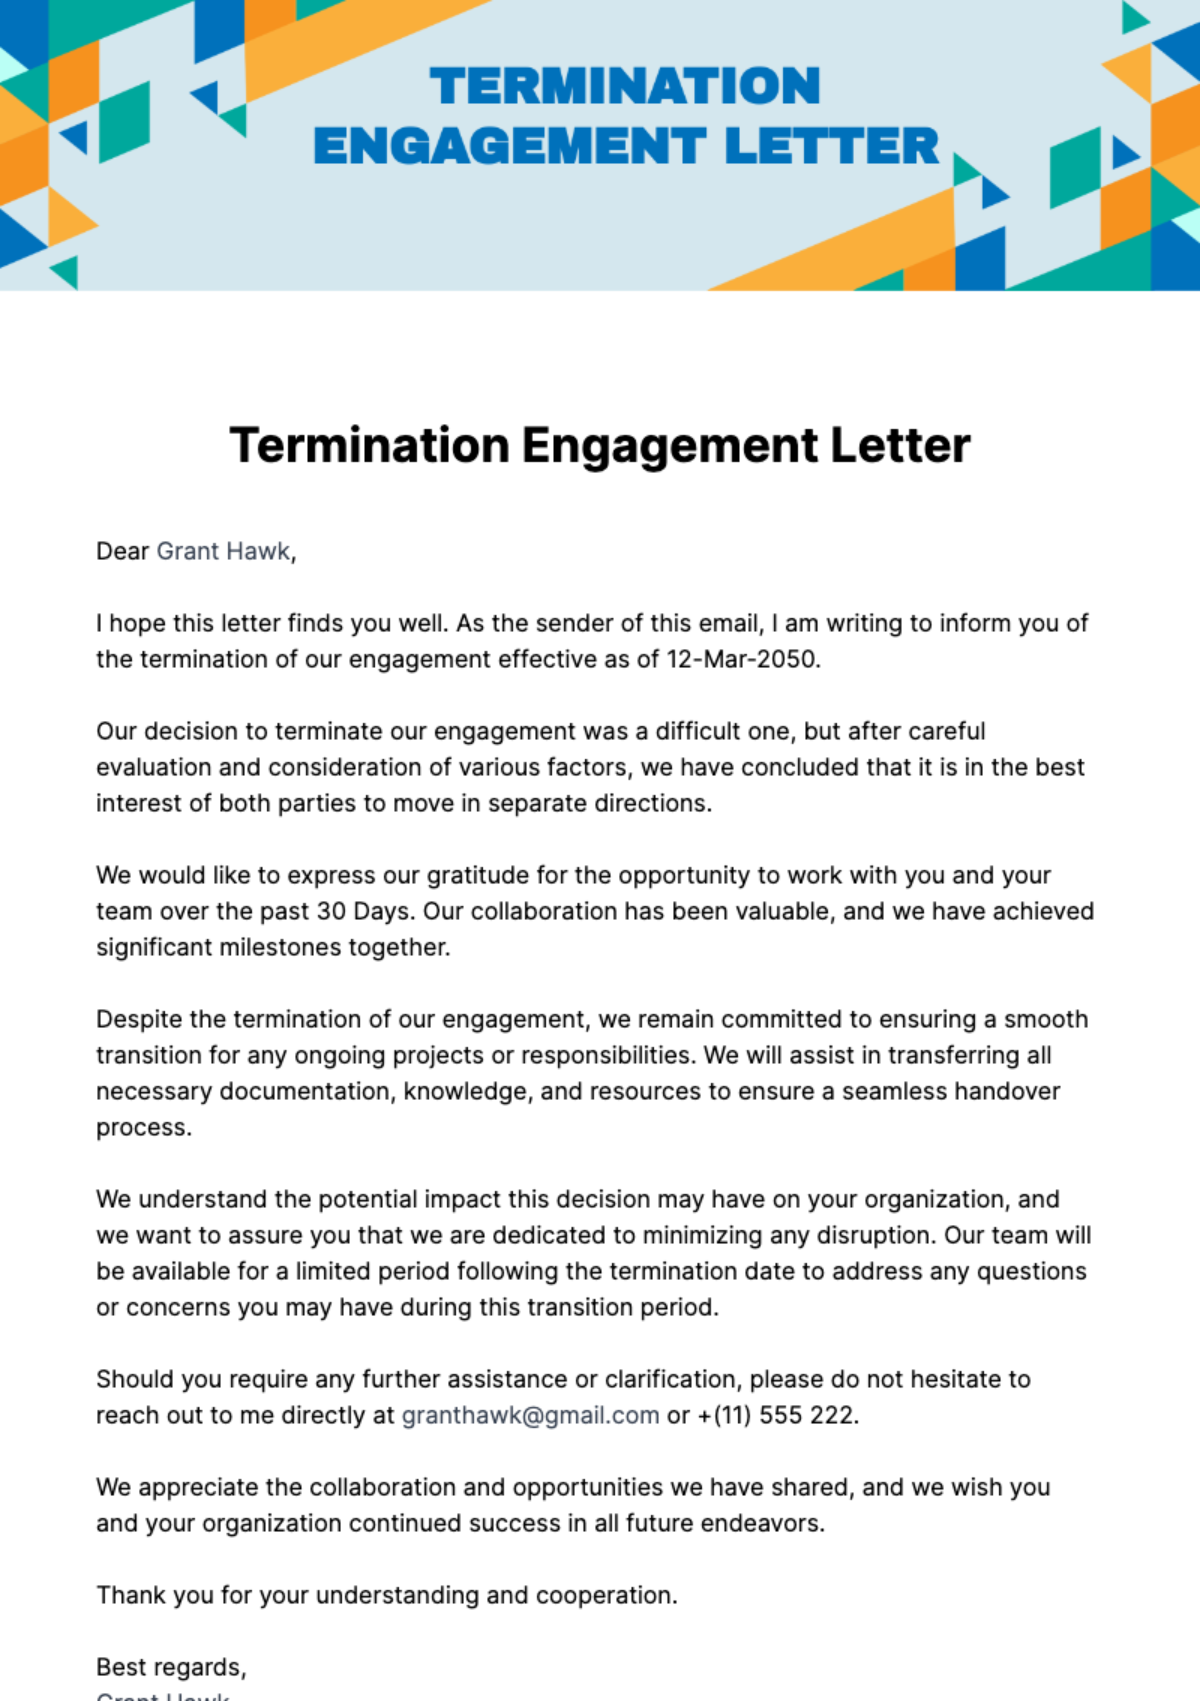 Free Termination Engagement Letter Template